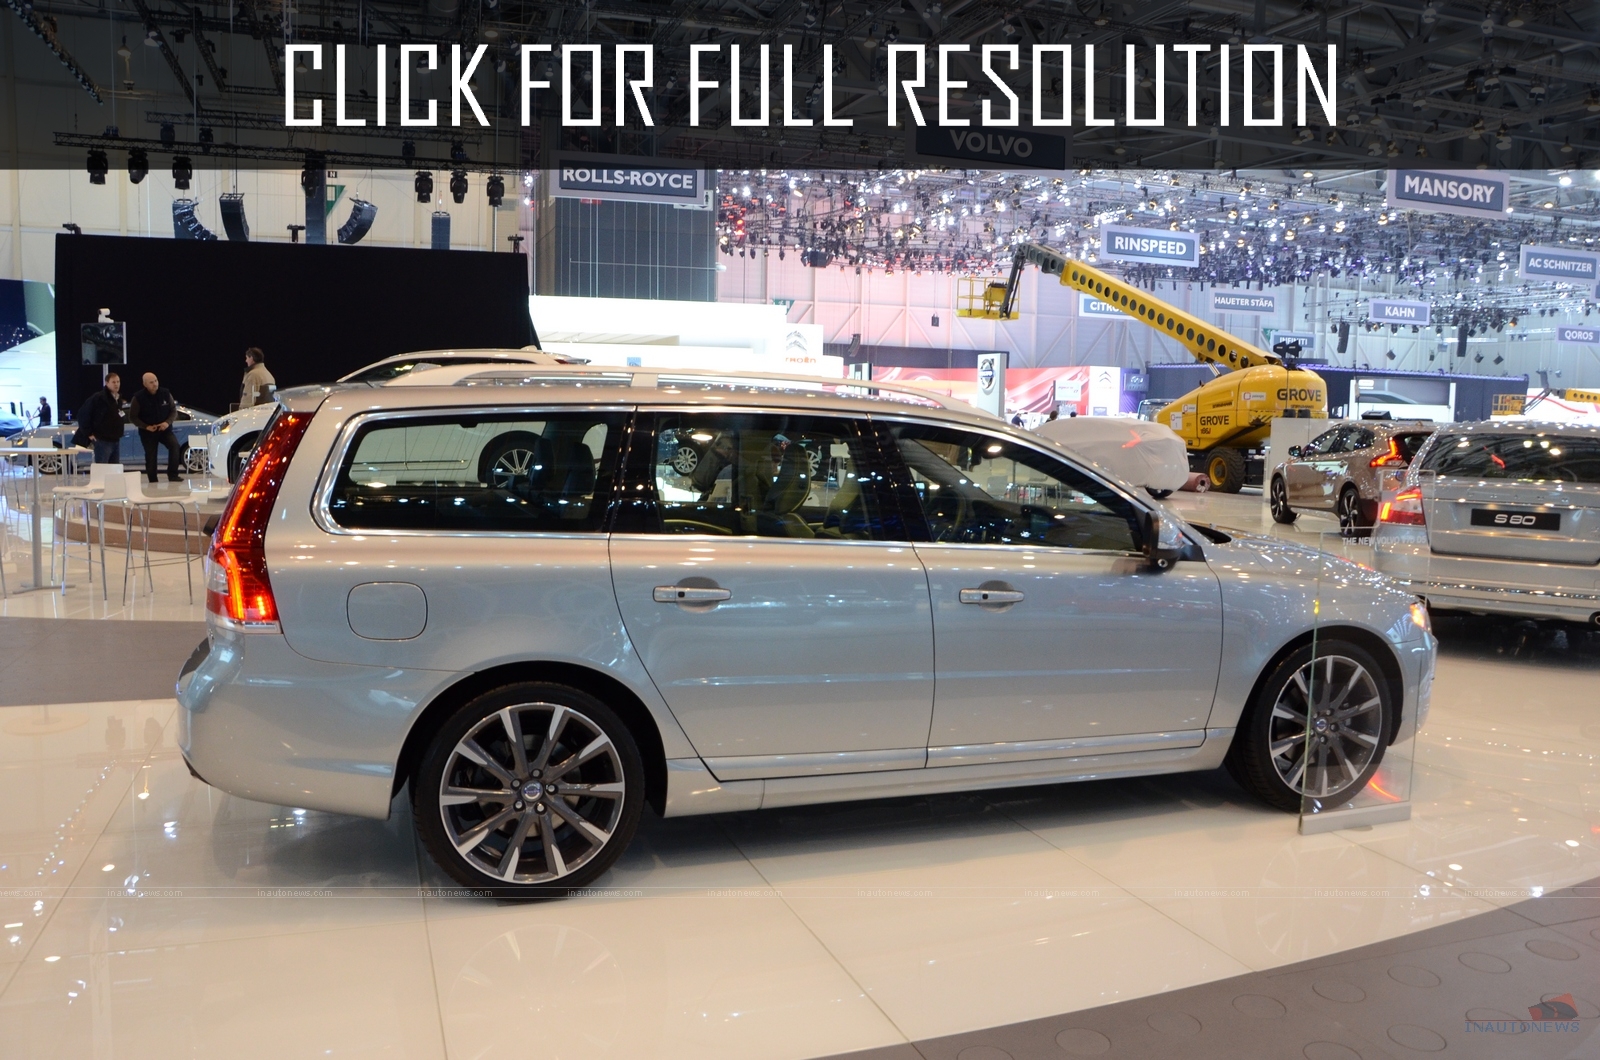 2015 Volvo V70 news, reviews, msrp, ratings with amazing